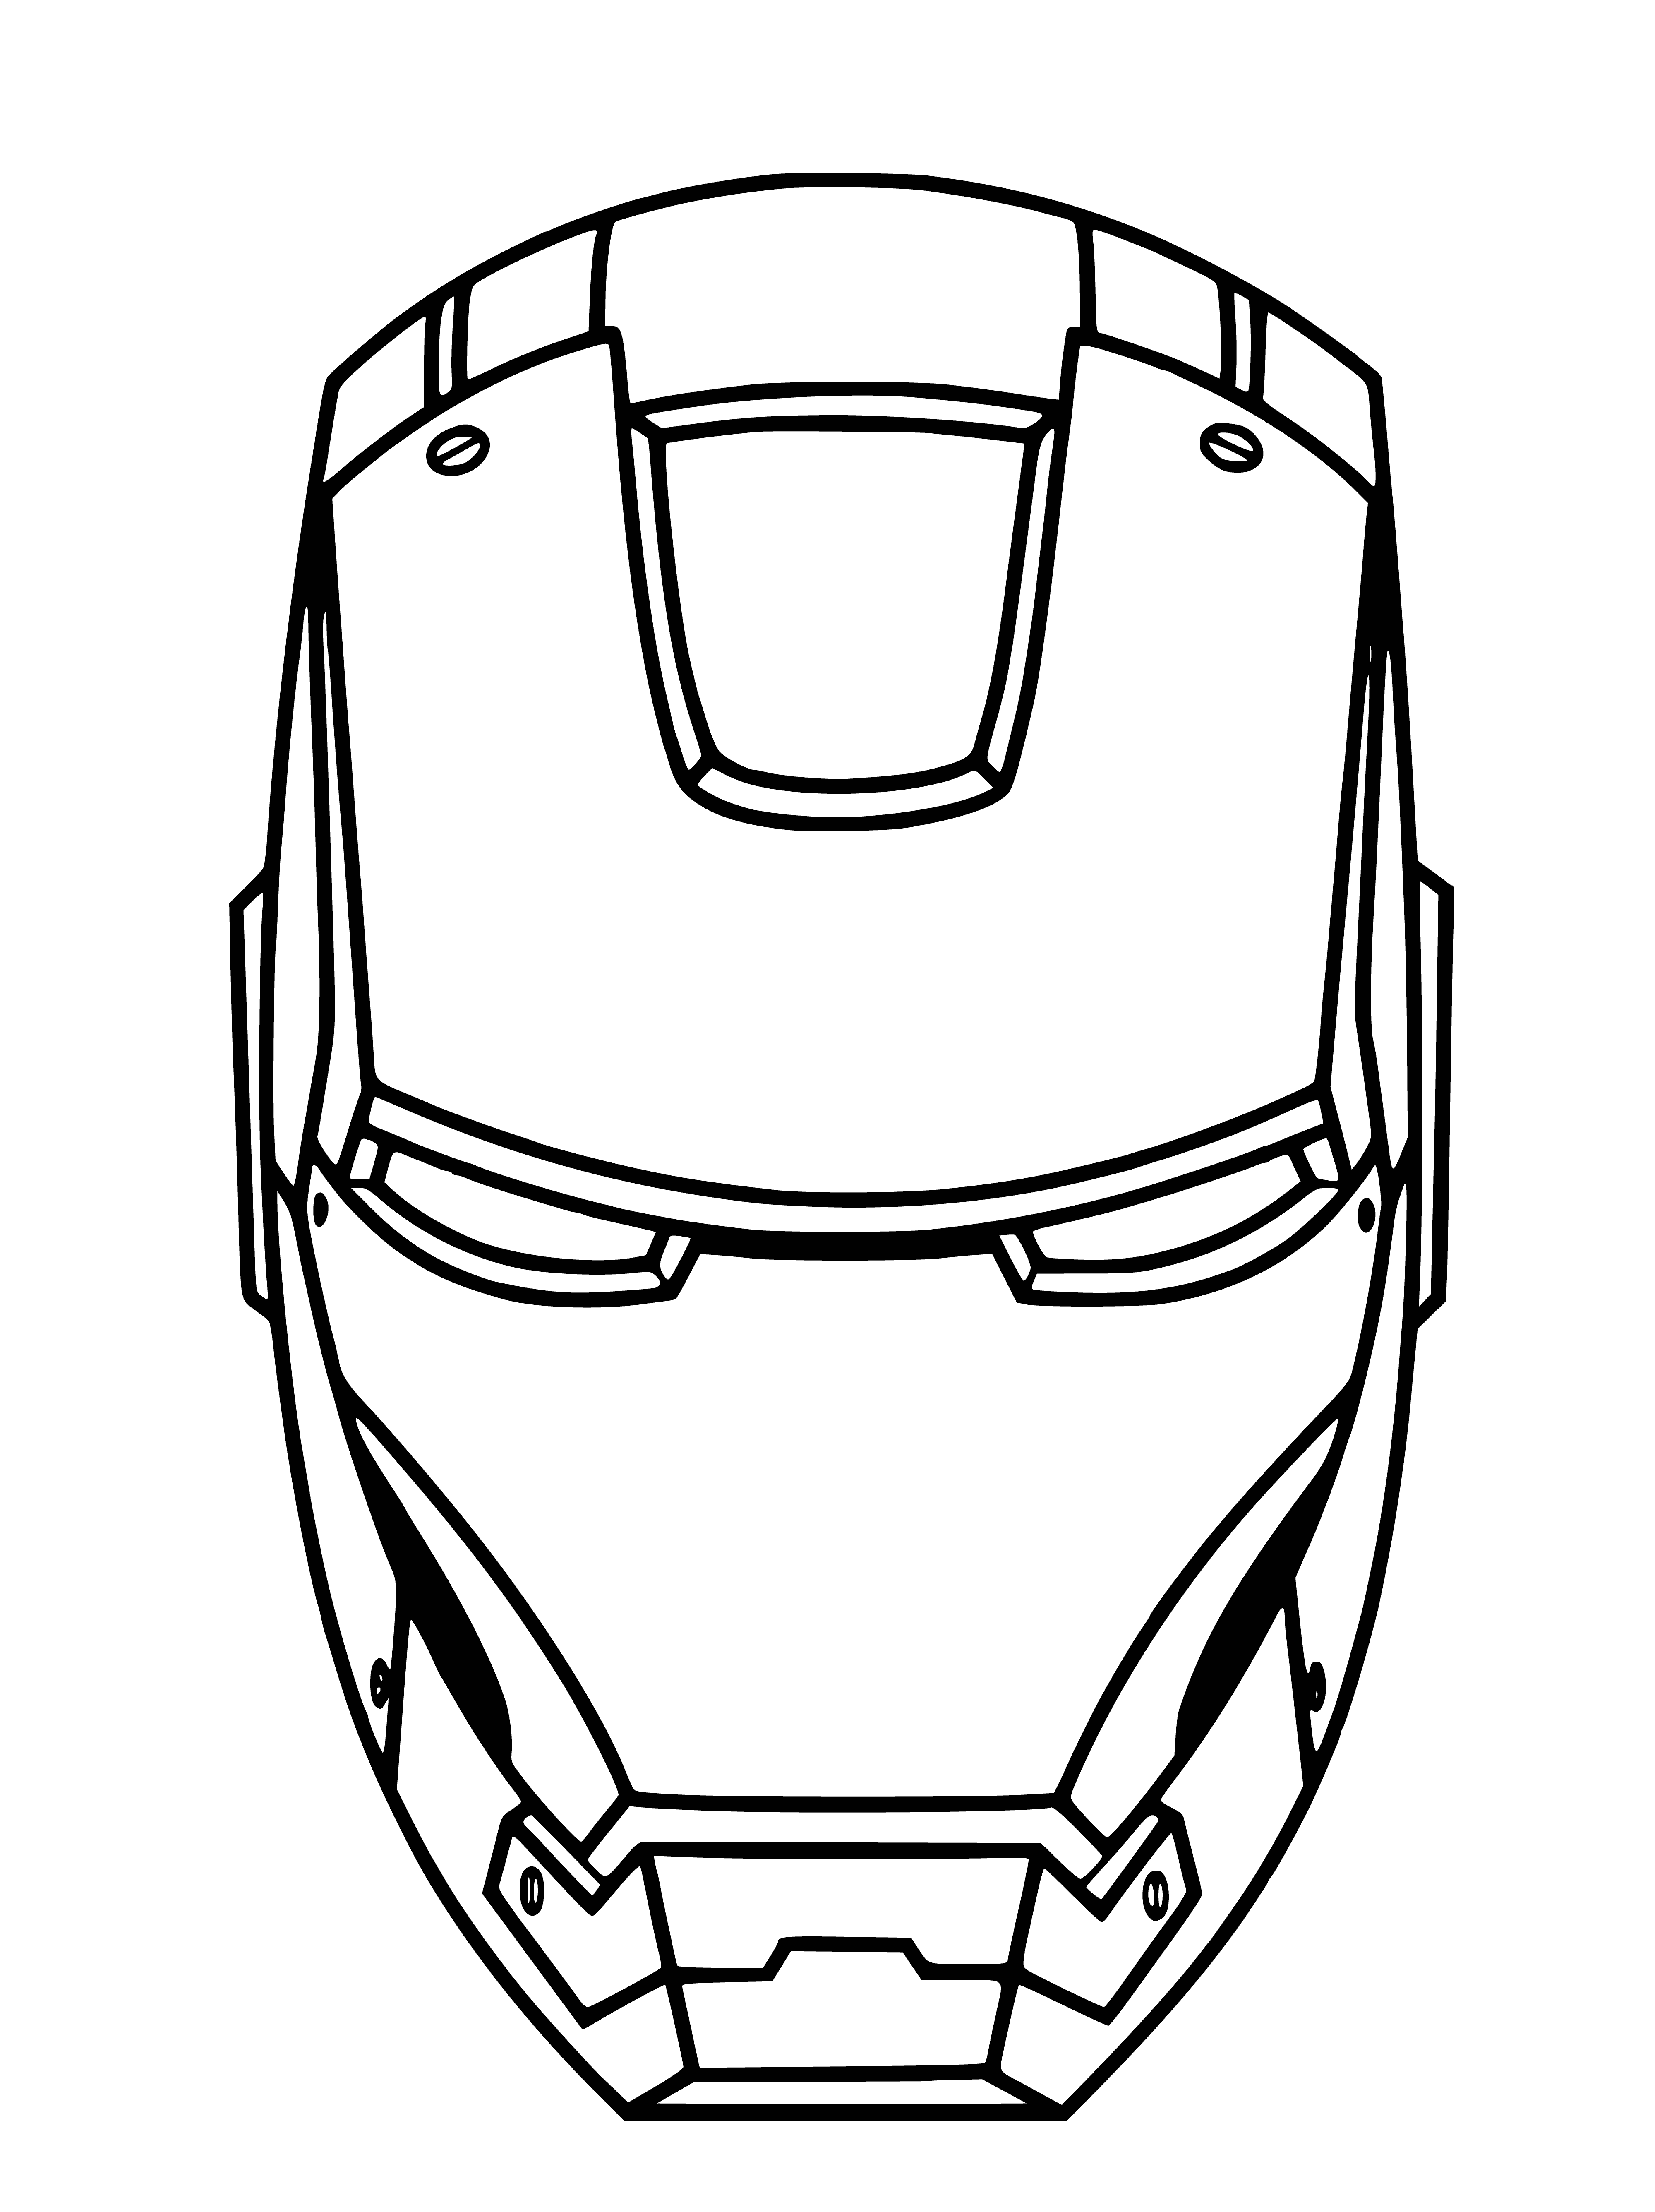 Iron Man mask coloring page